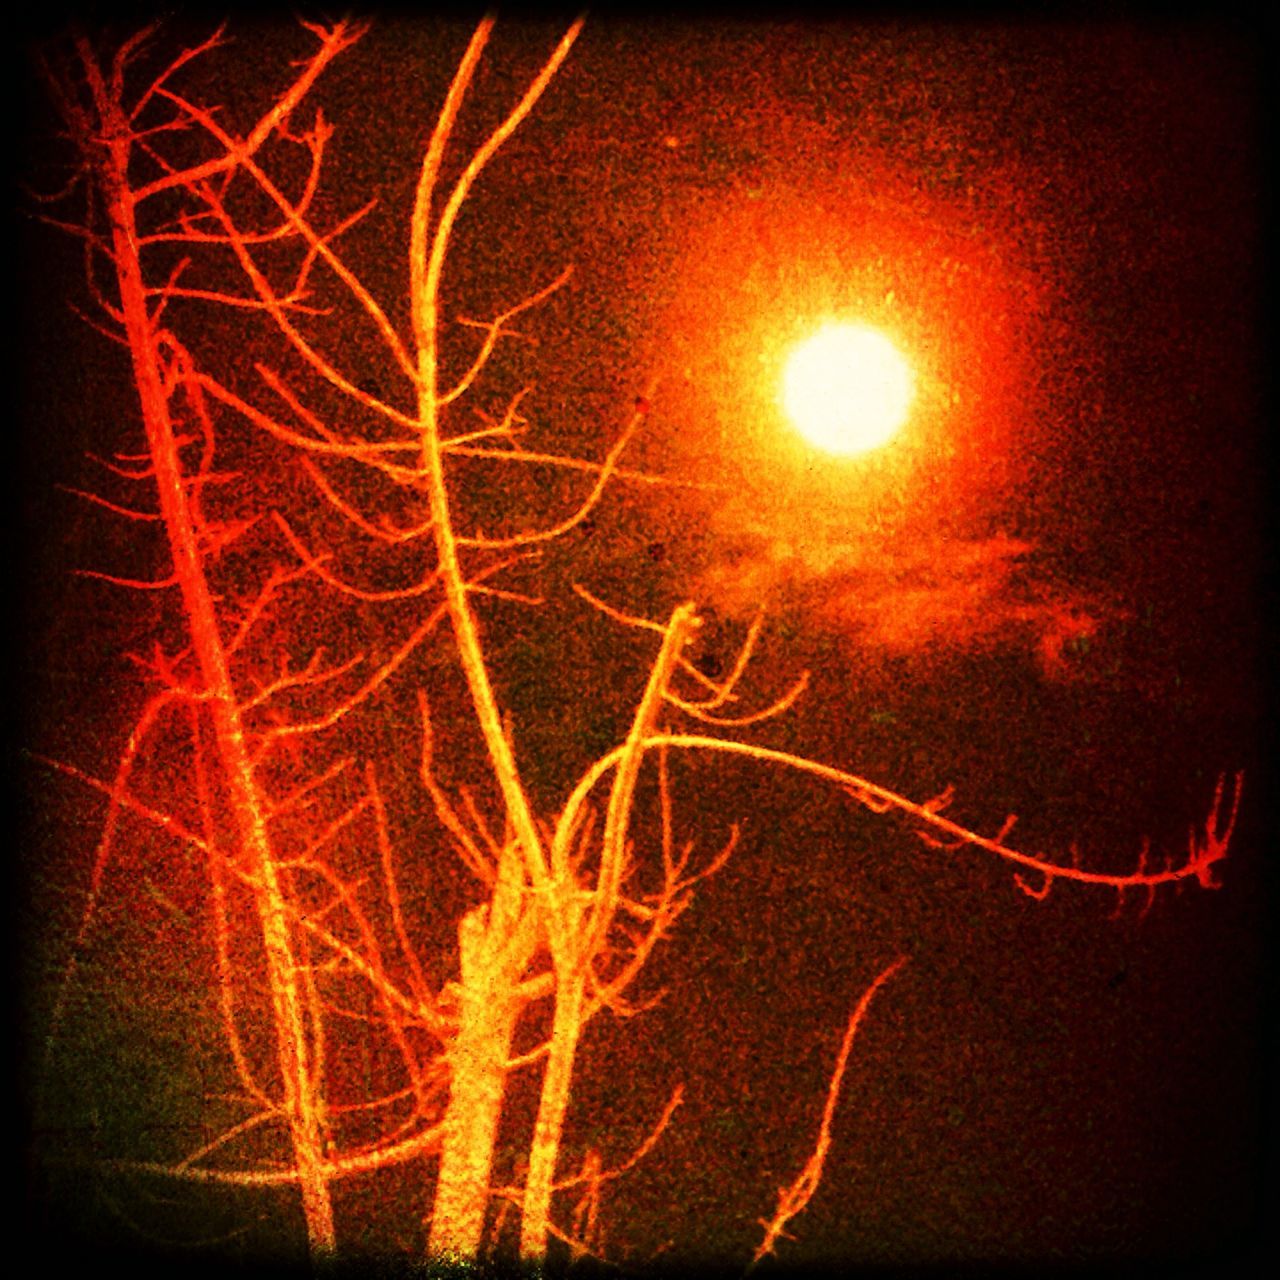 night, illuminated, transfer print, glowing, bare tree, auto post production filter, orange color, abstract, long exposure, yellow, sky, light - natural phenomenon, low angle view, burning, multi colored, celebration, outdoors, fire - natural phenomenon, creativity, no people